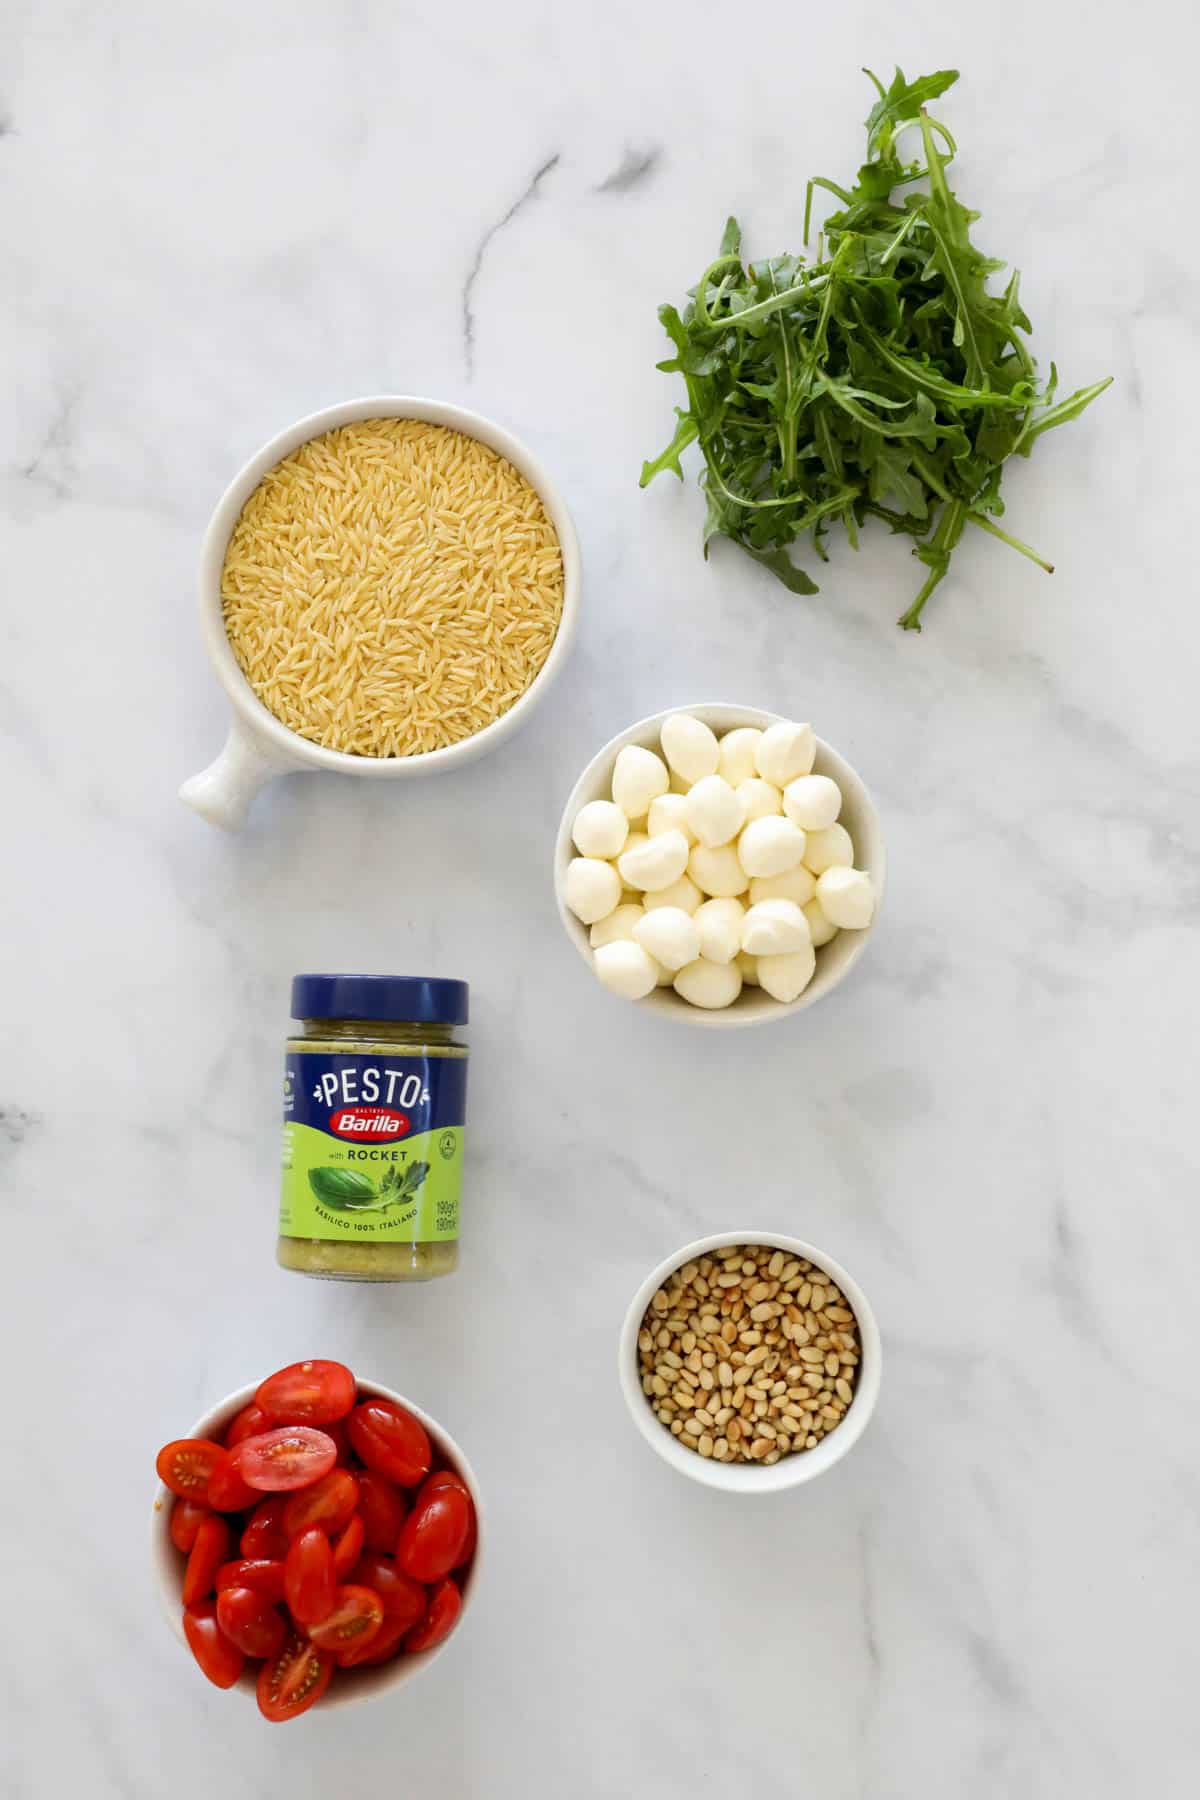 Ingredients to make a pasta pesto salad in small bowls on a bench top.